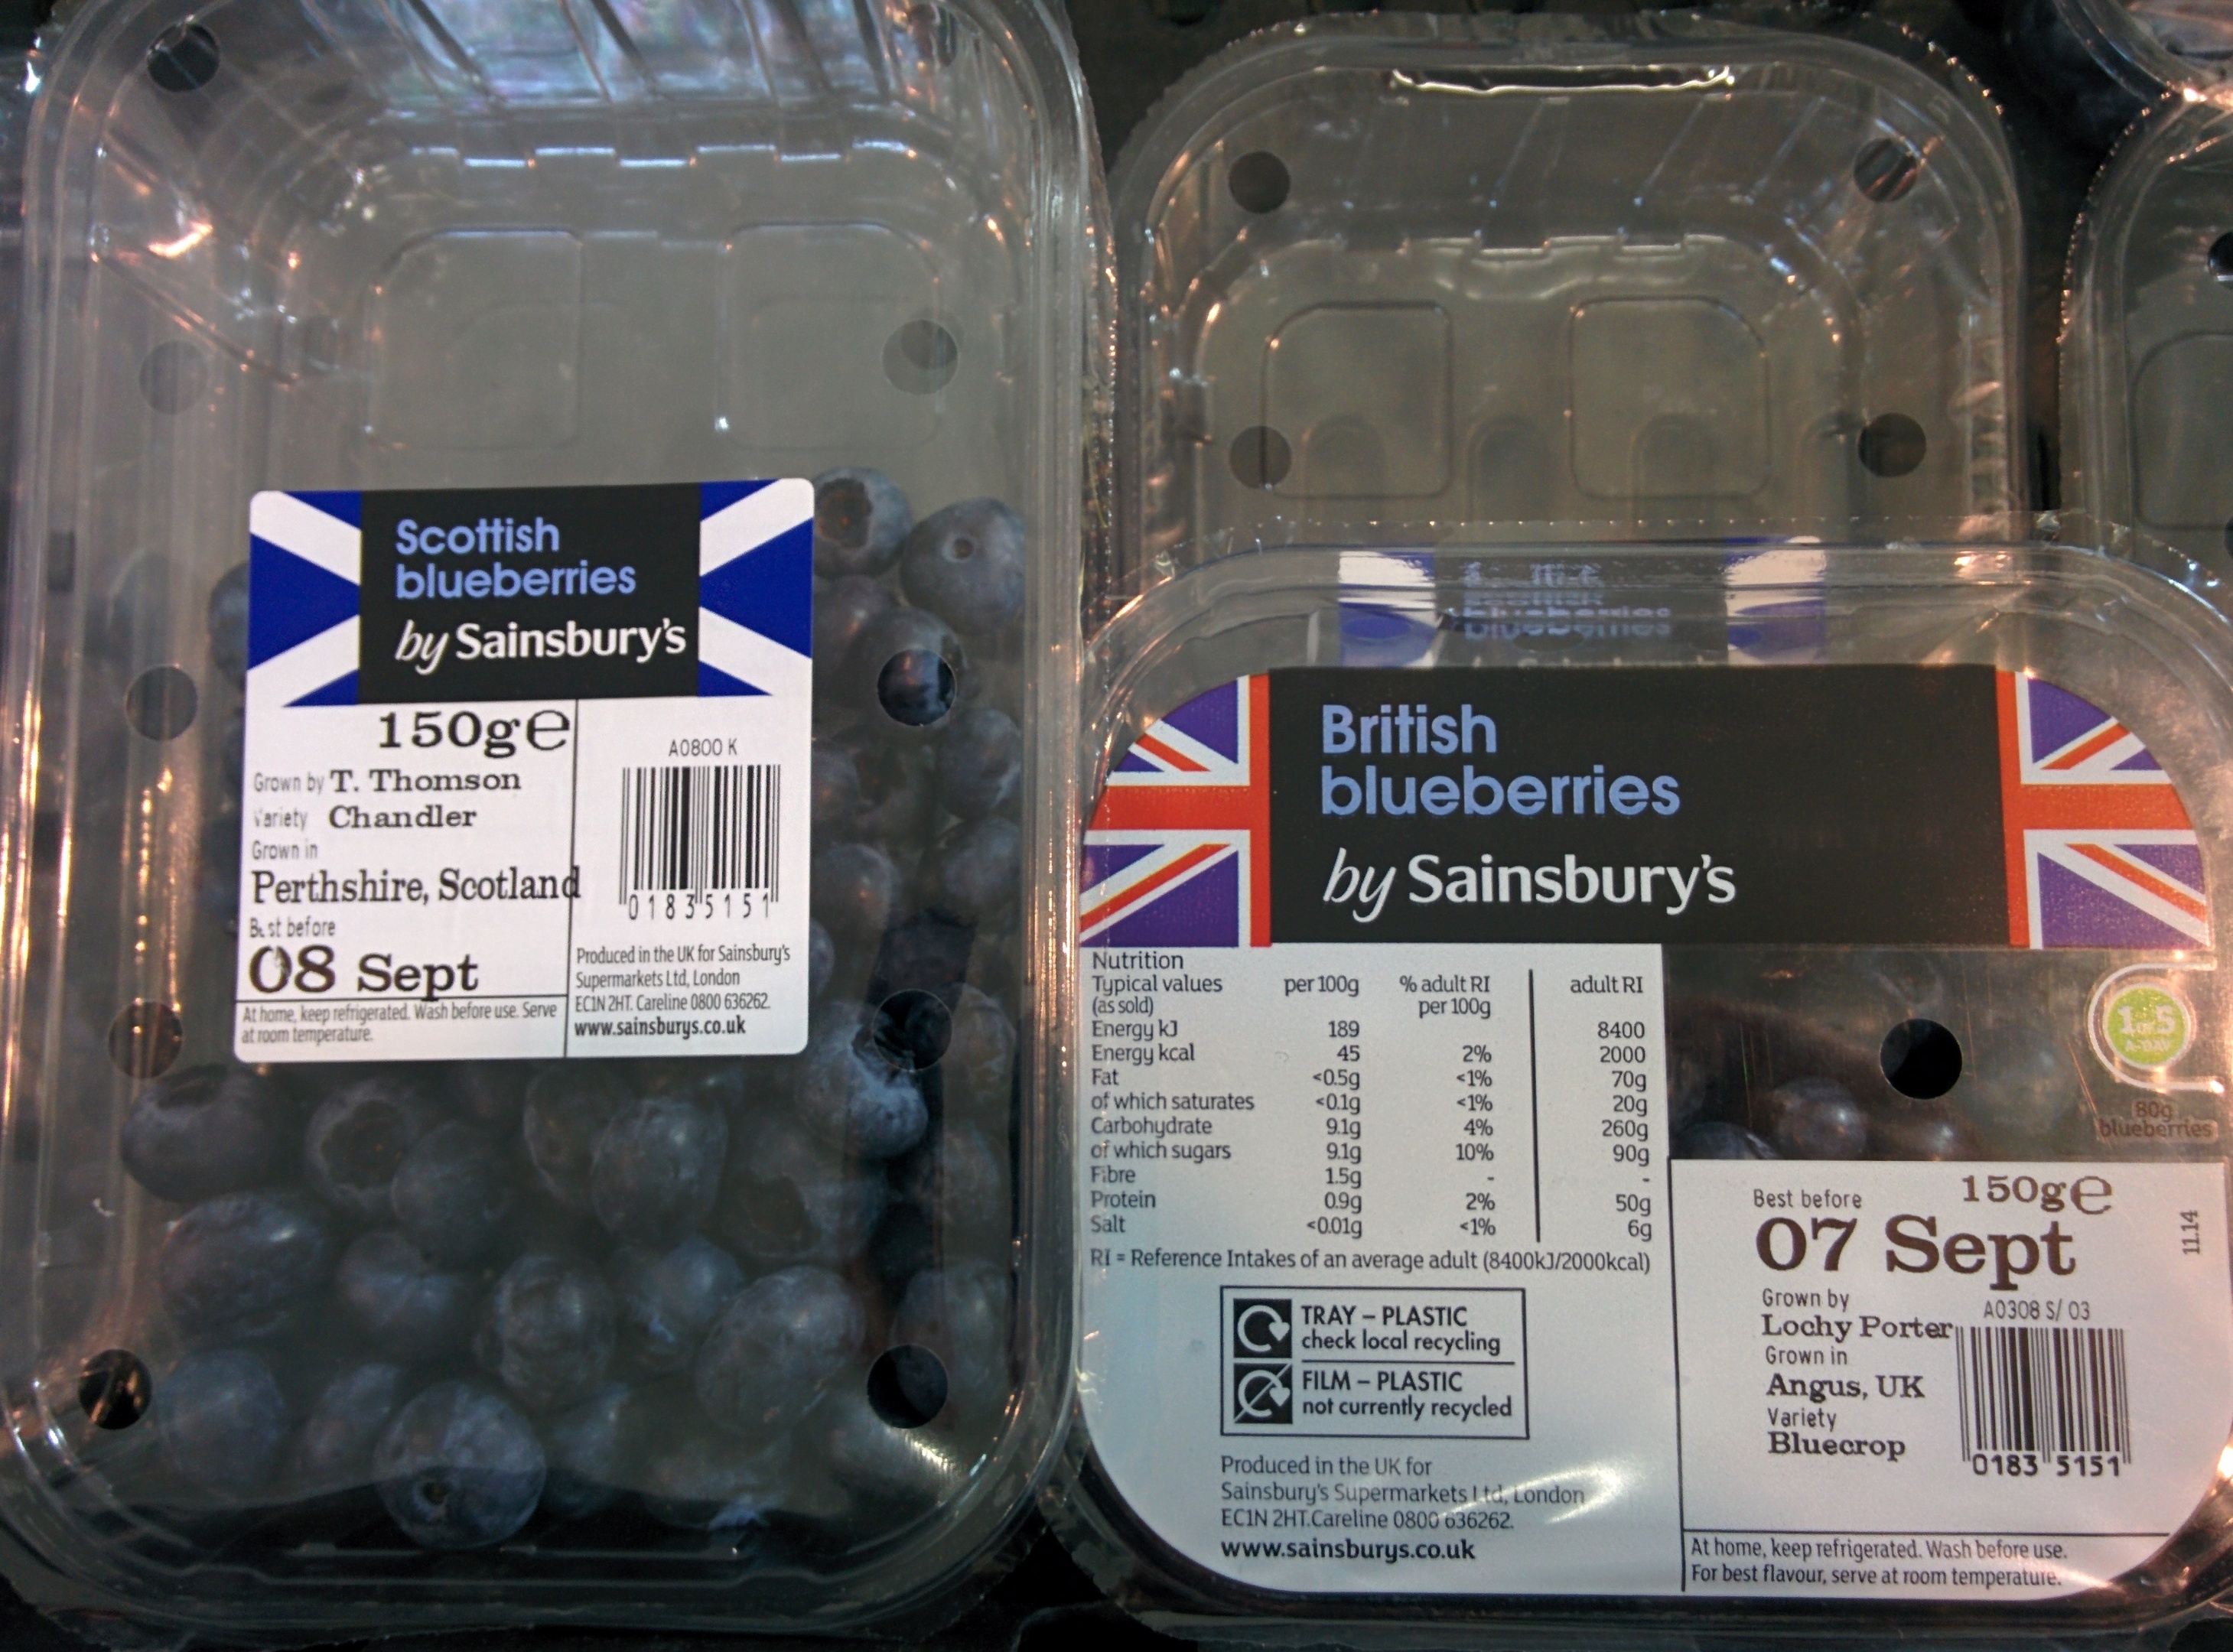 An issue with labelling at Sainsbury's was flagged up last week.